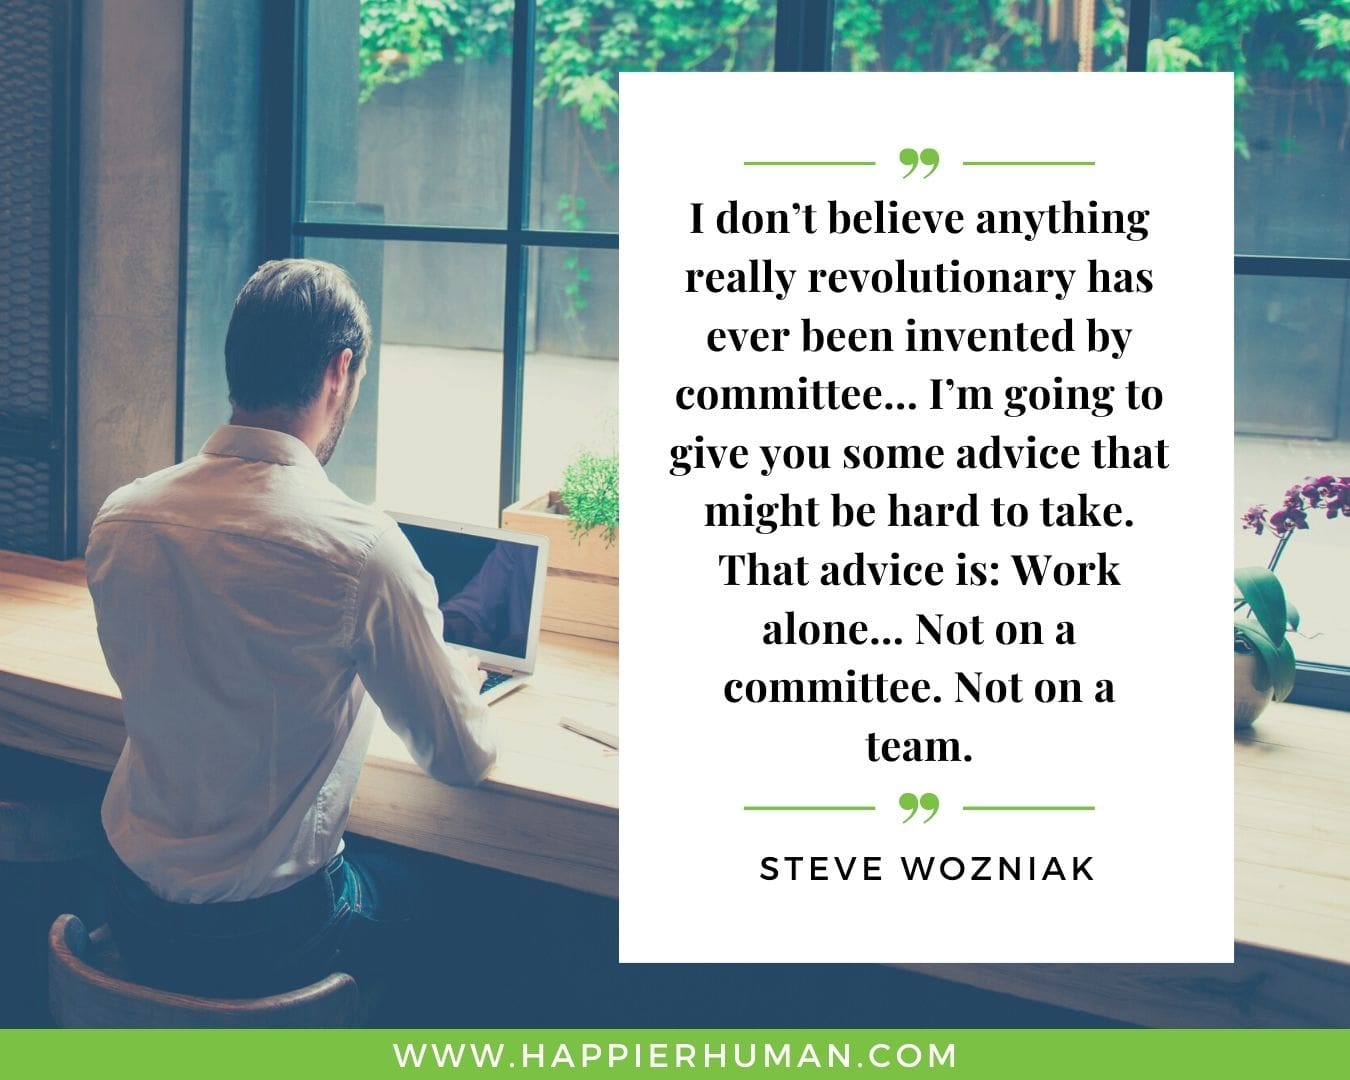 Introvert Quotes - “I don’t believe anything really revolutionary has ever been invented by committee… I’m going to give you some advice that might be hard to take. That advice is: Work alone… Not on a committee. Not on a team.” – Steve Wozniak